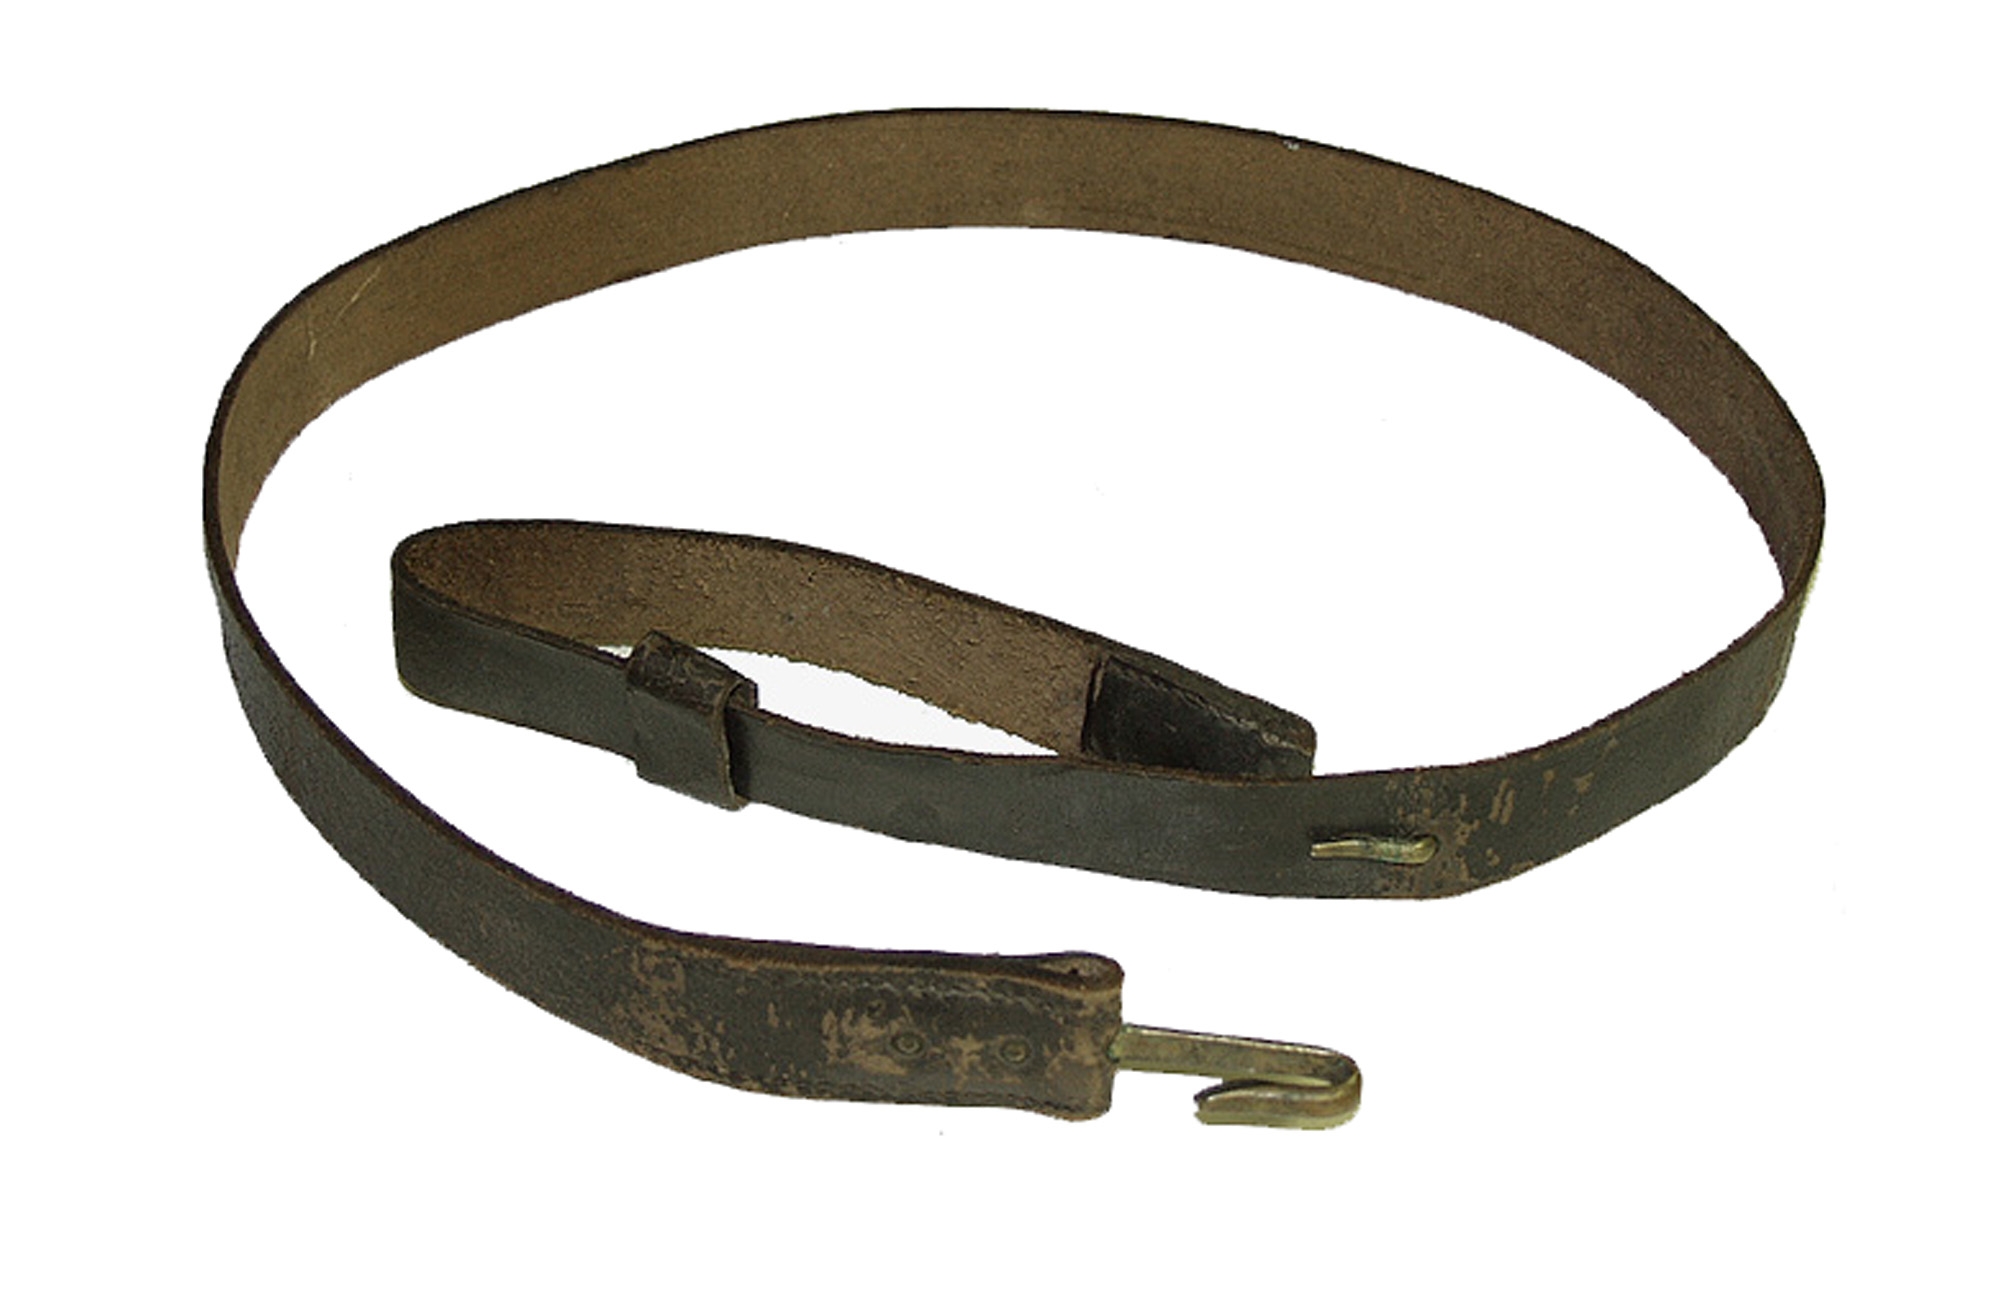 CAVALRY OVER THE SHOULDER STRAP — Horse Soldier